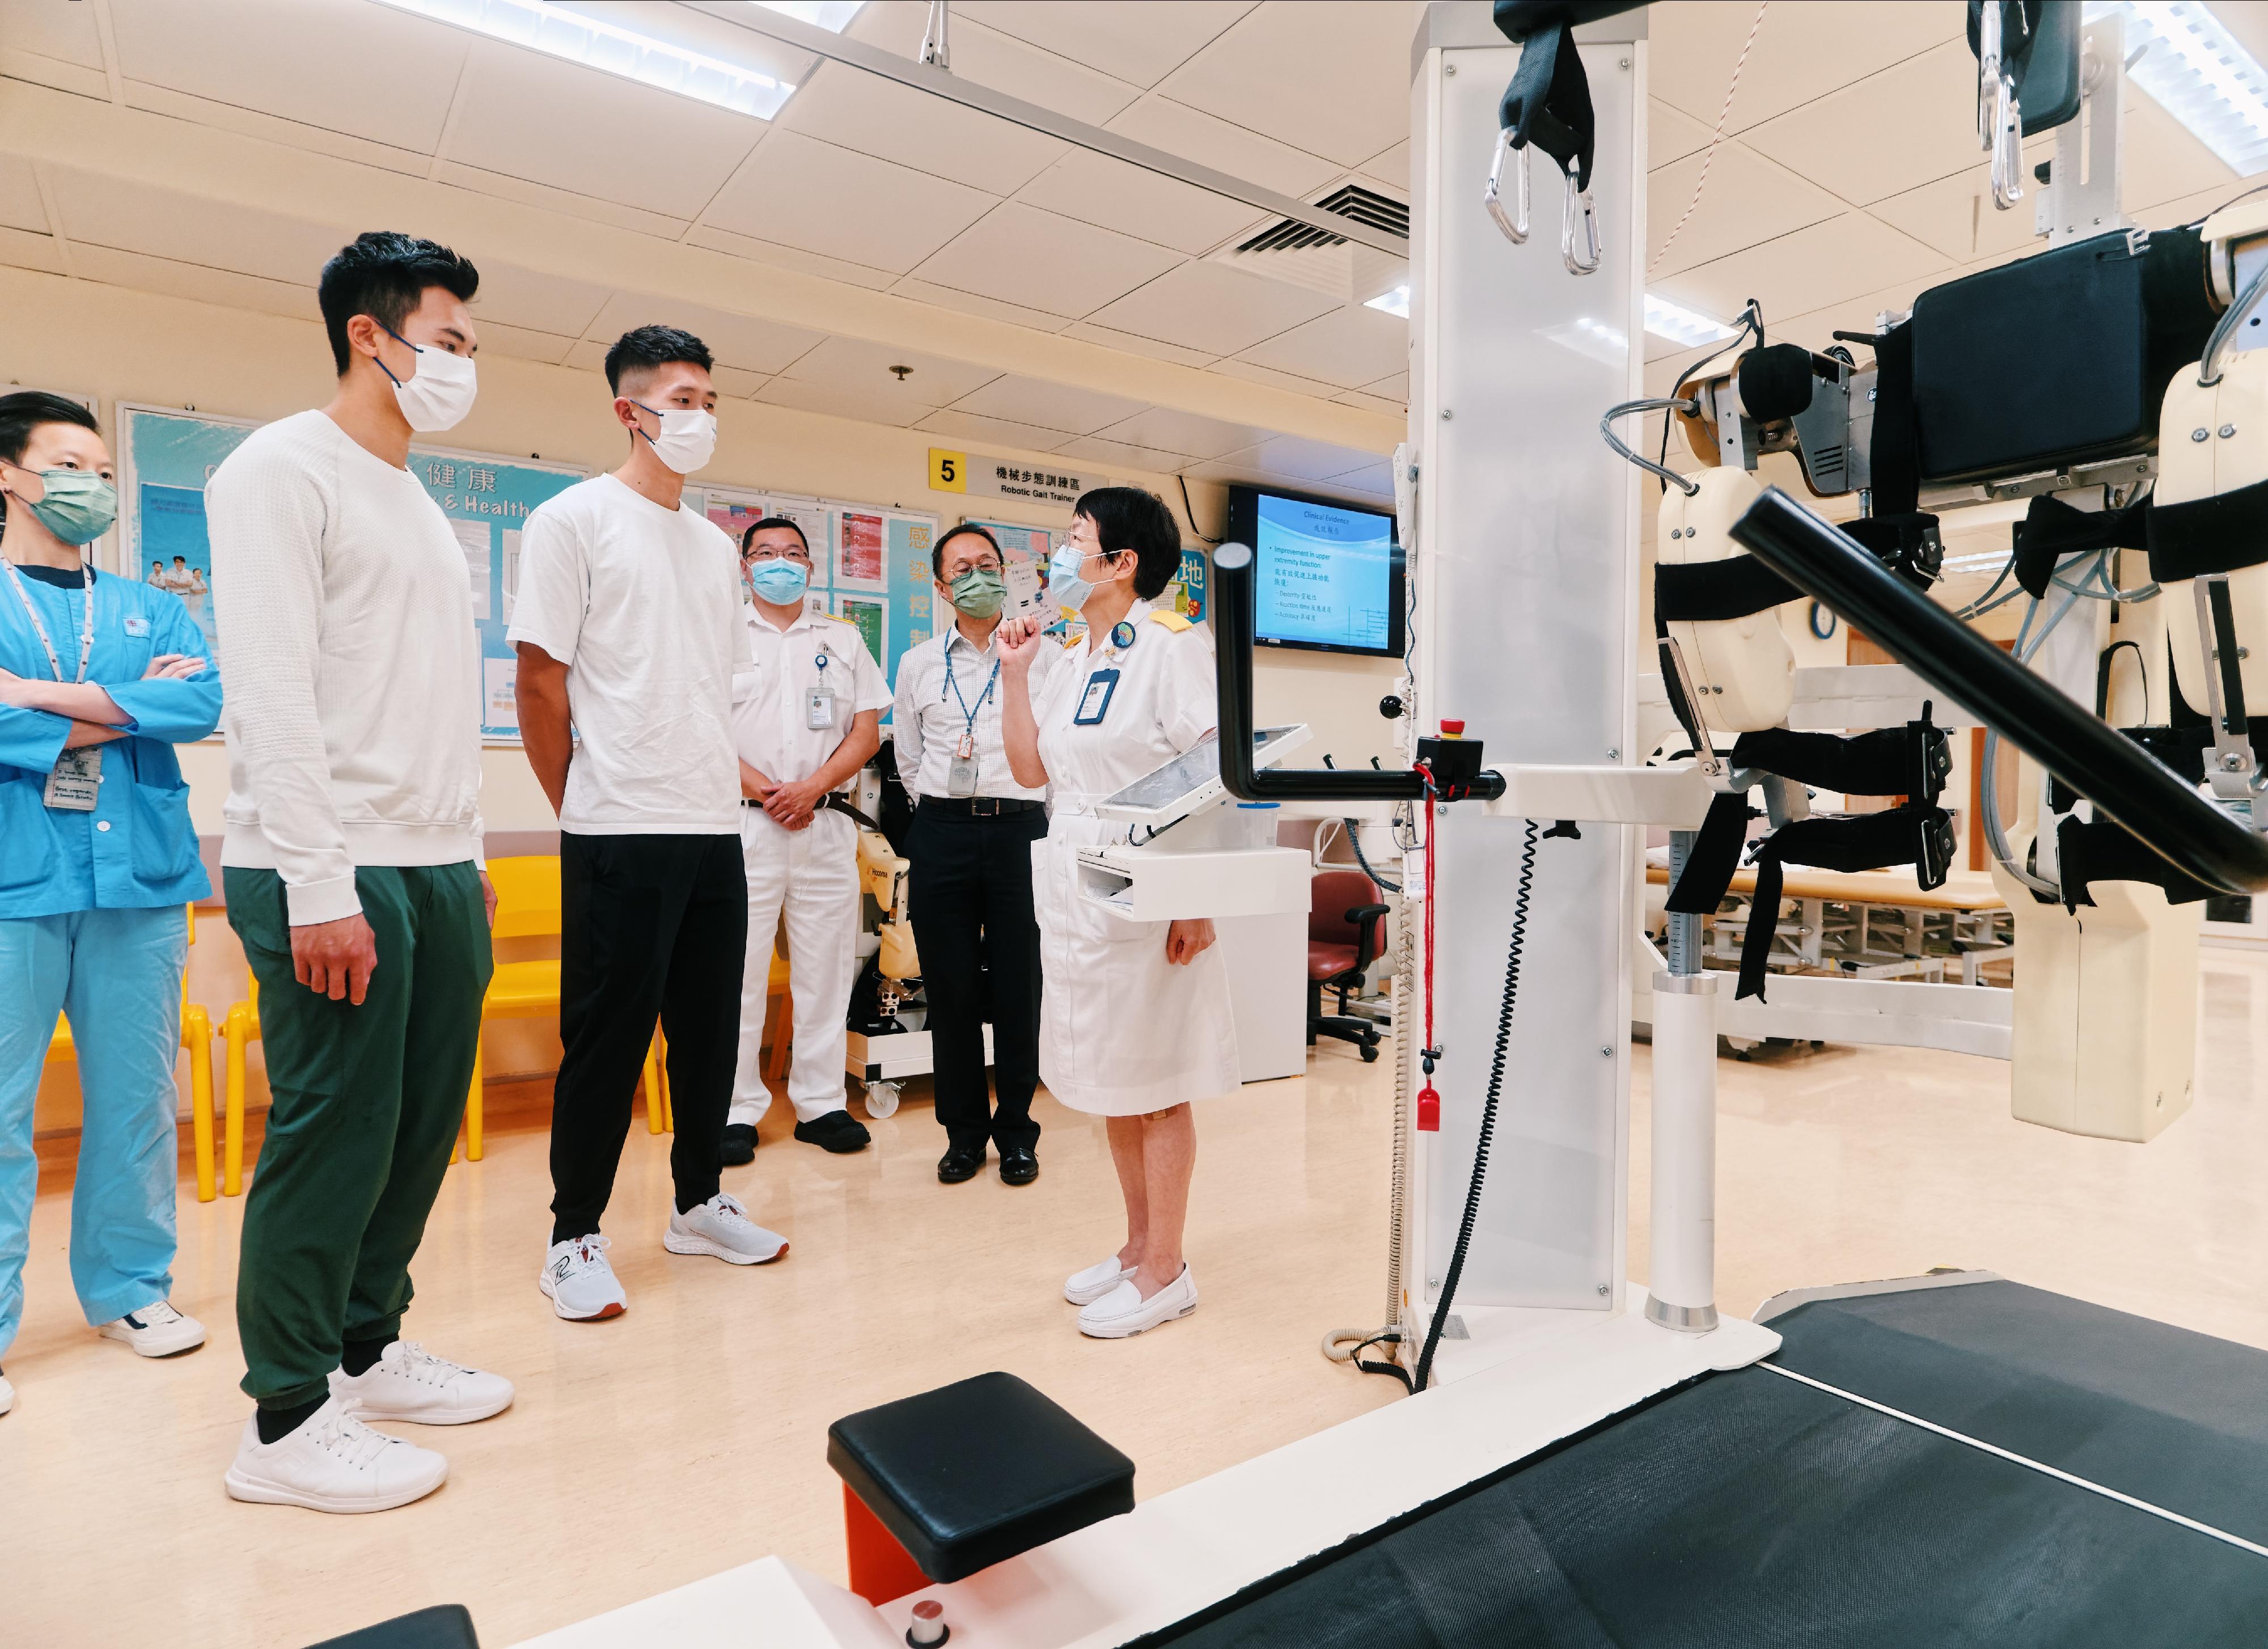 Lam San-tung (second left) and Wong Wai-chun (third left), who won the gold medal in Rowing Men's Coxless Pairs in the 19th Asian Games Hangzhou, visited the Integrated Neurological Rehabilitation Centre of Princess Margaret Hospital and viewed the rehabilitation equipment of the Physiotherapy Department on November 13.